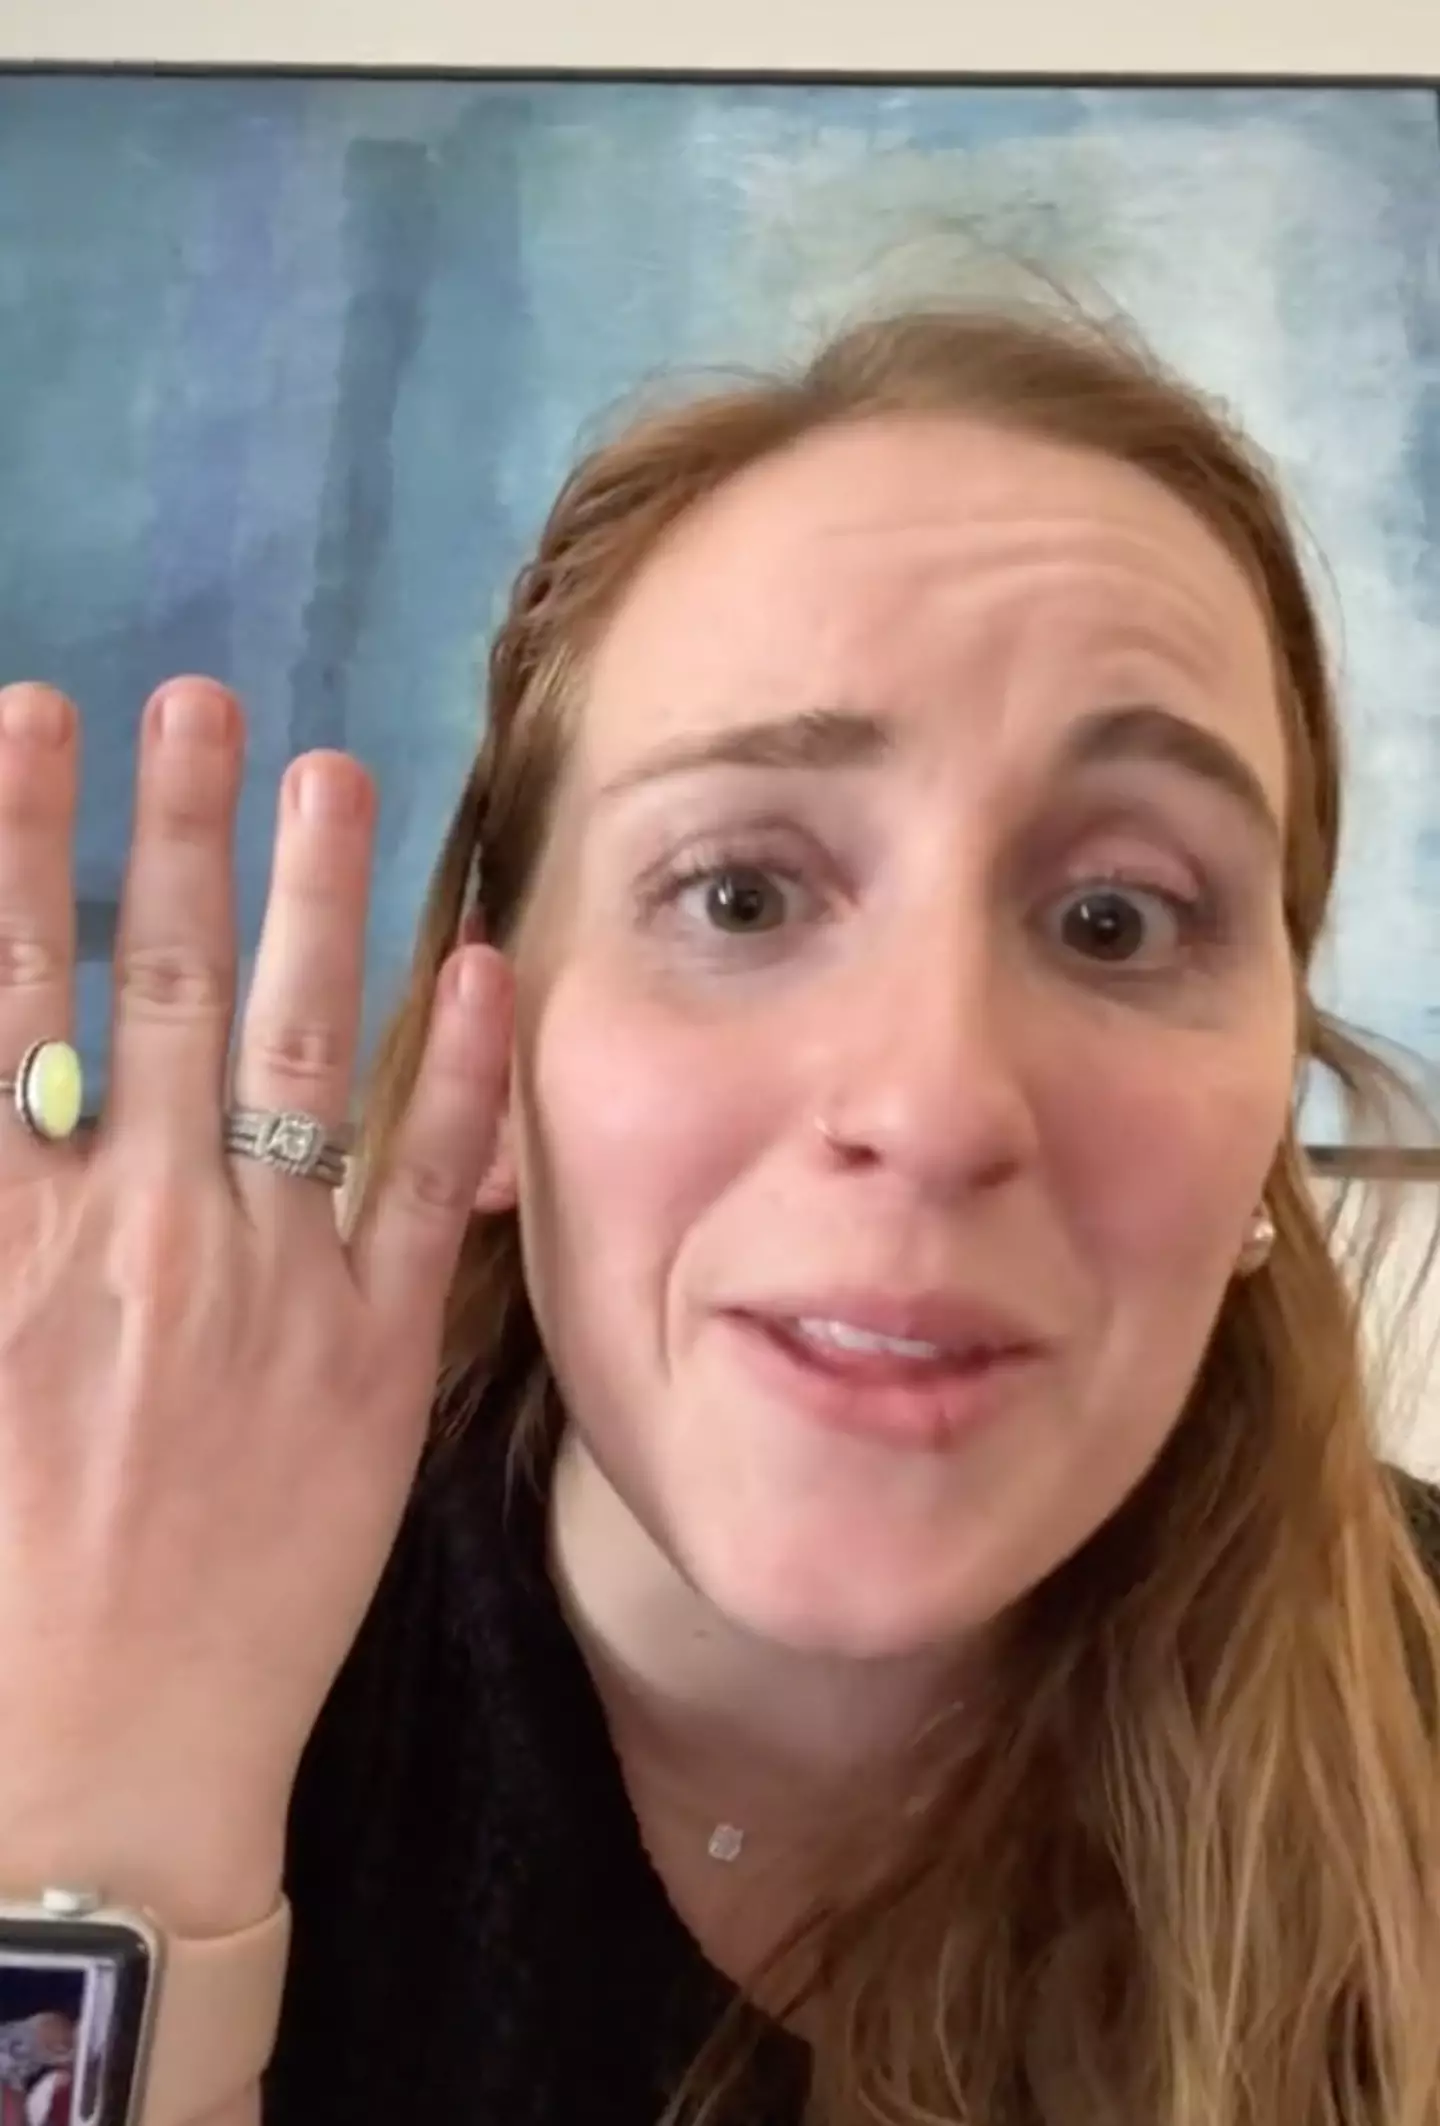 The TikTok user showed the ring she had to ask for (